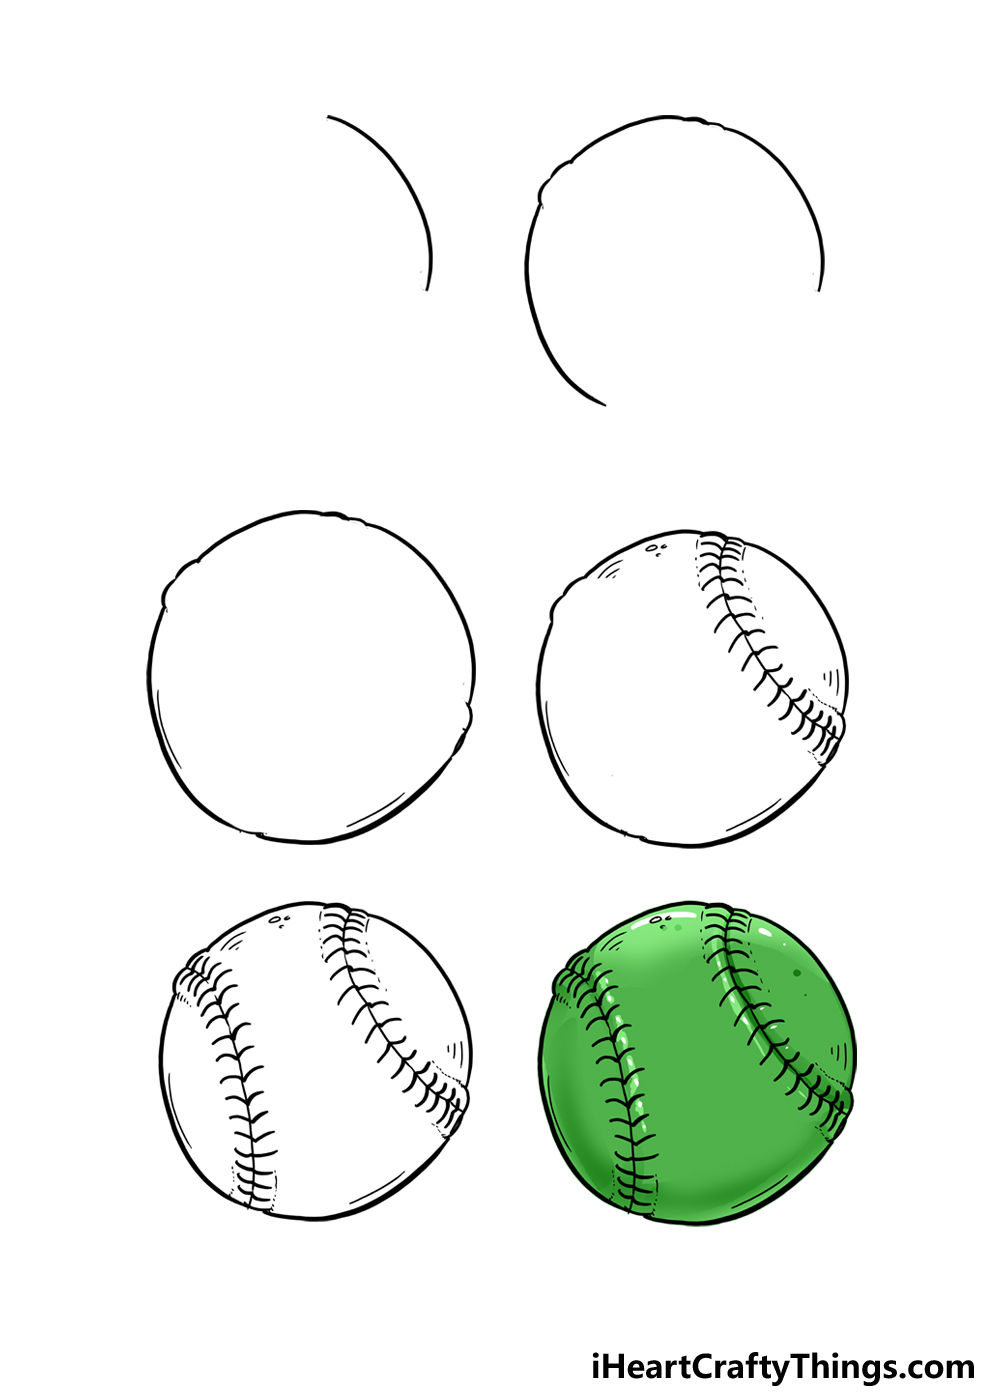 How to Draw A Softball